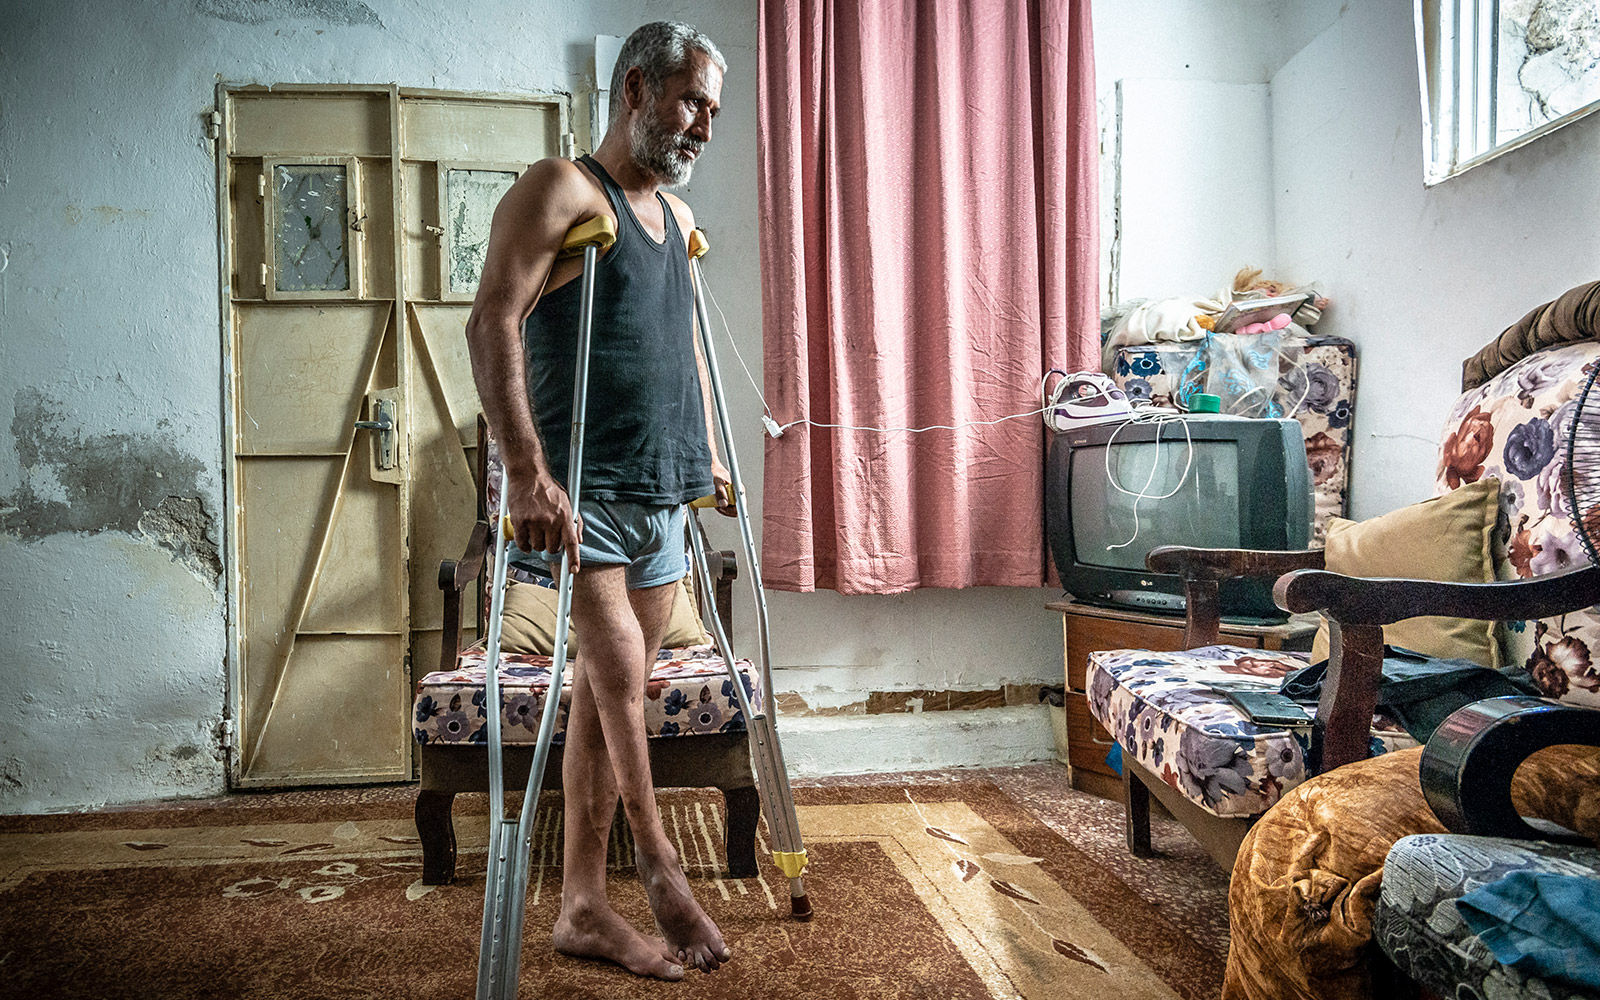 Jordan, Ibrahim was wounded in the leg during a bombing in Syria. He moves with the help of crutches.